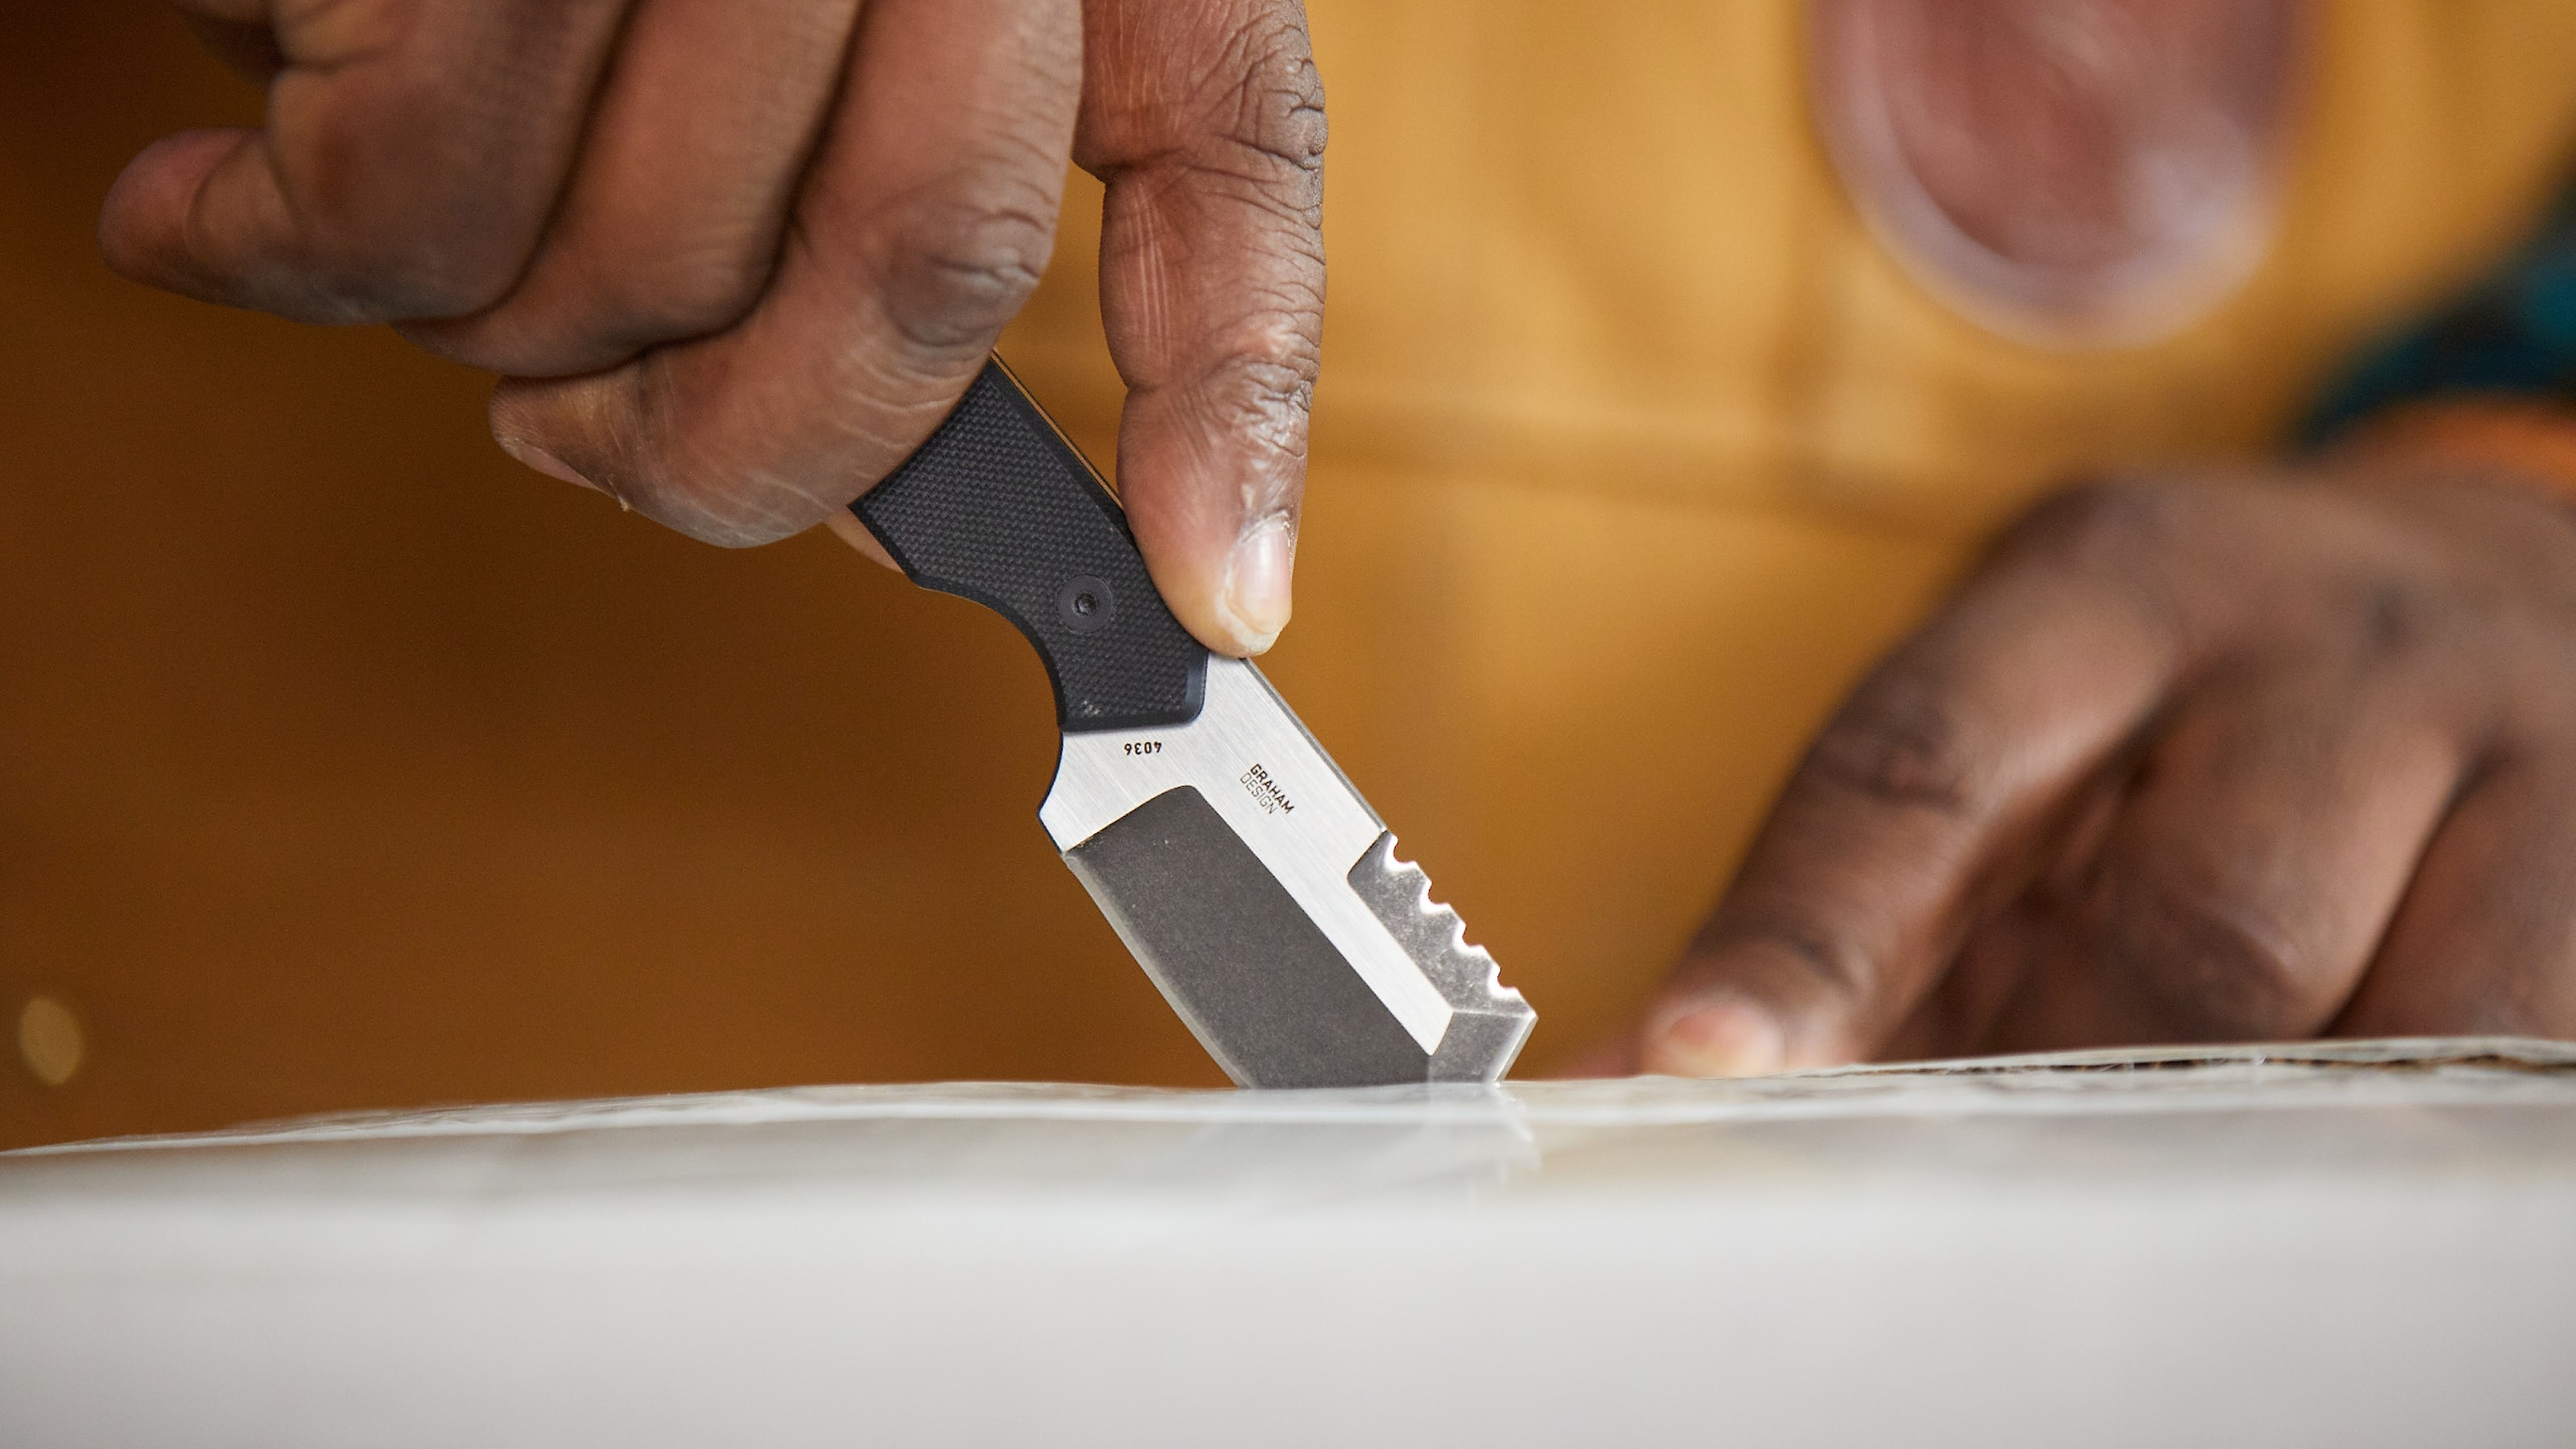 Close up of man using a knife to slice a smooth material.